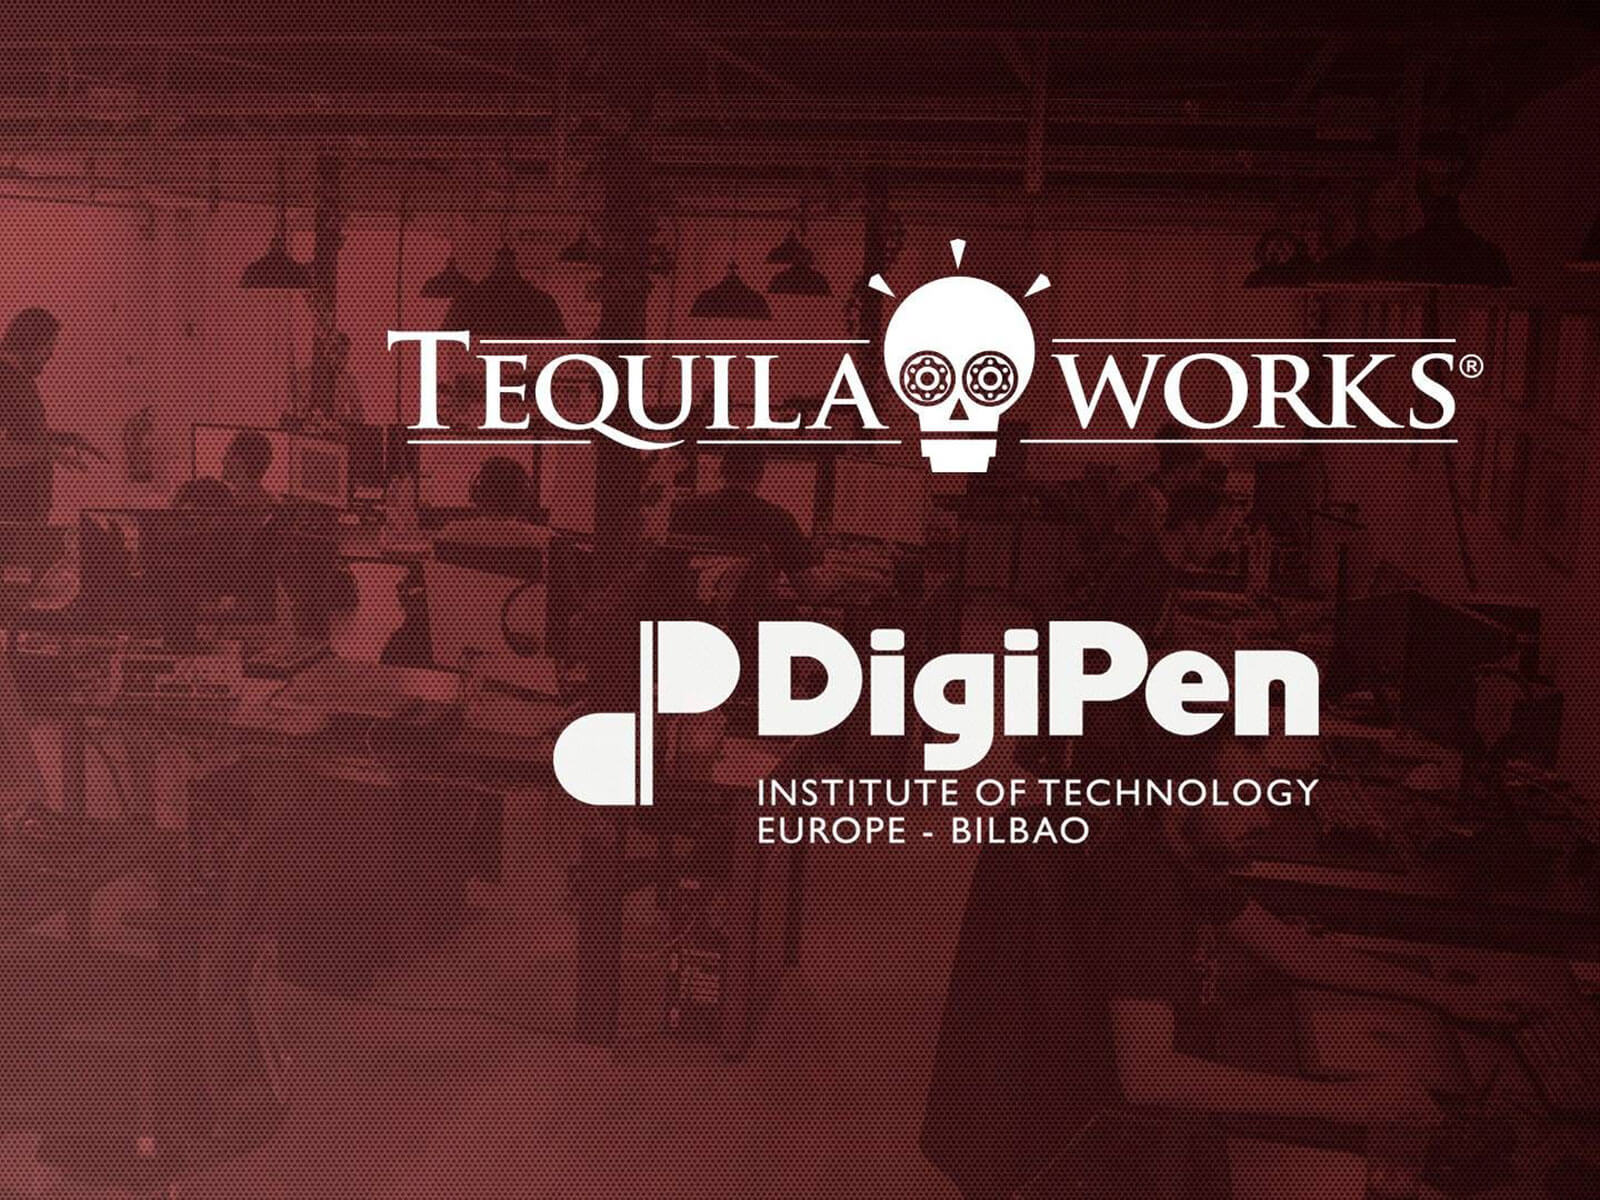 Tequila Works and DigiPen logos imposed over a photo of a team of game developers working